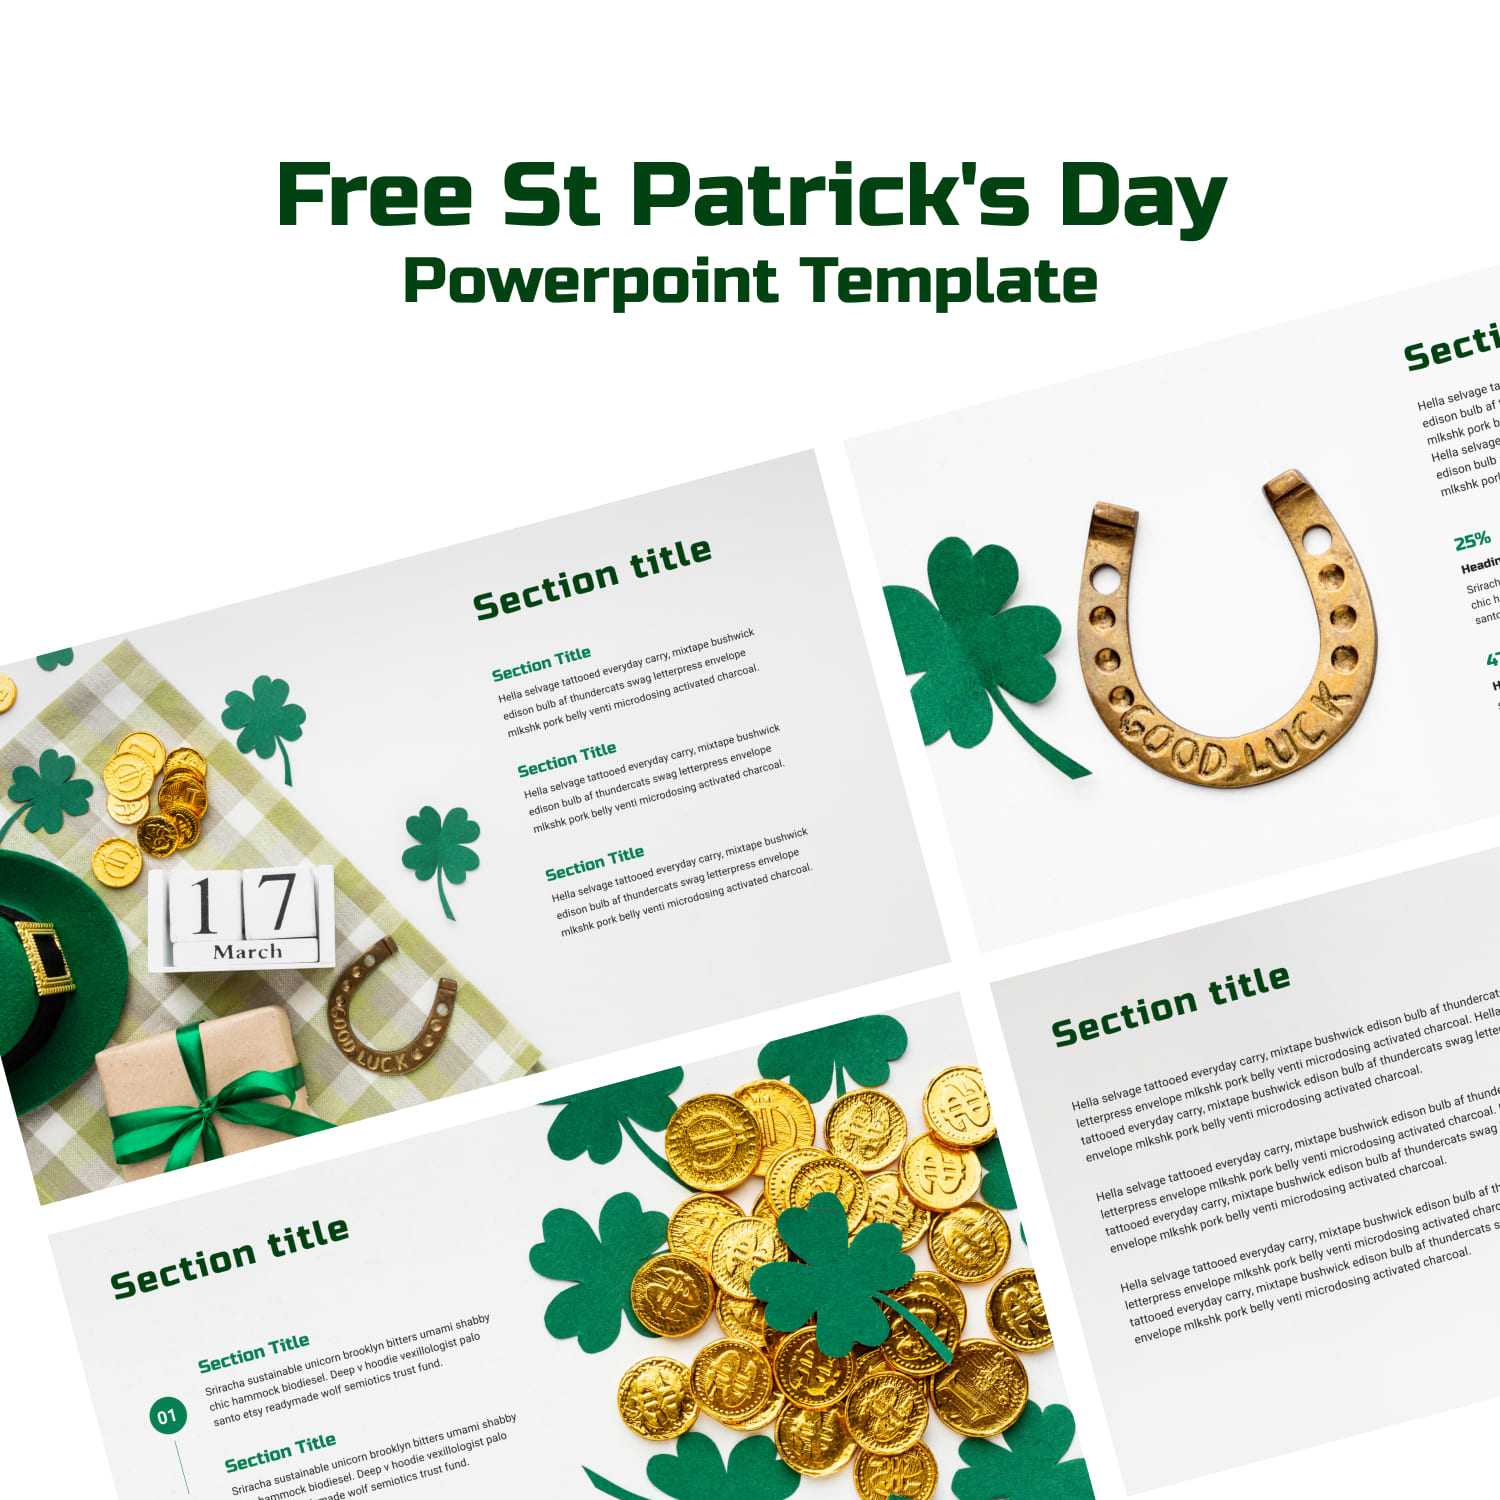 Free St Patricks Day Powerpoint Template 1500x1500 2.